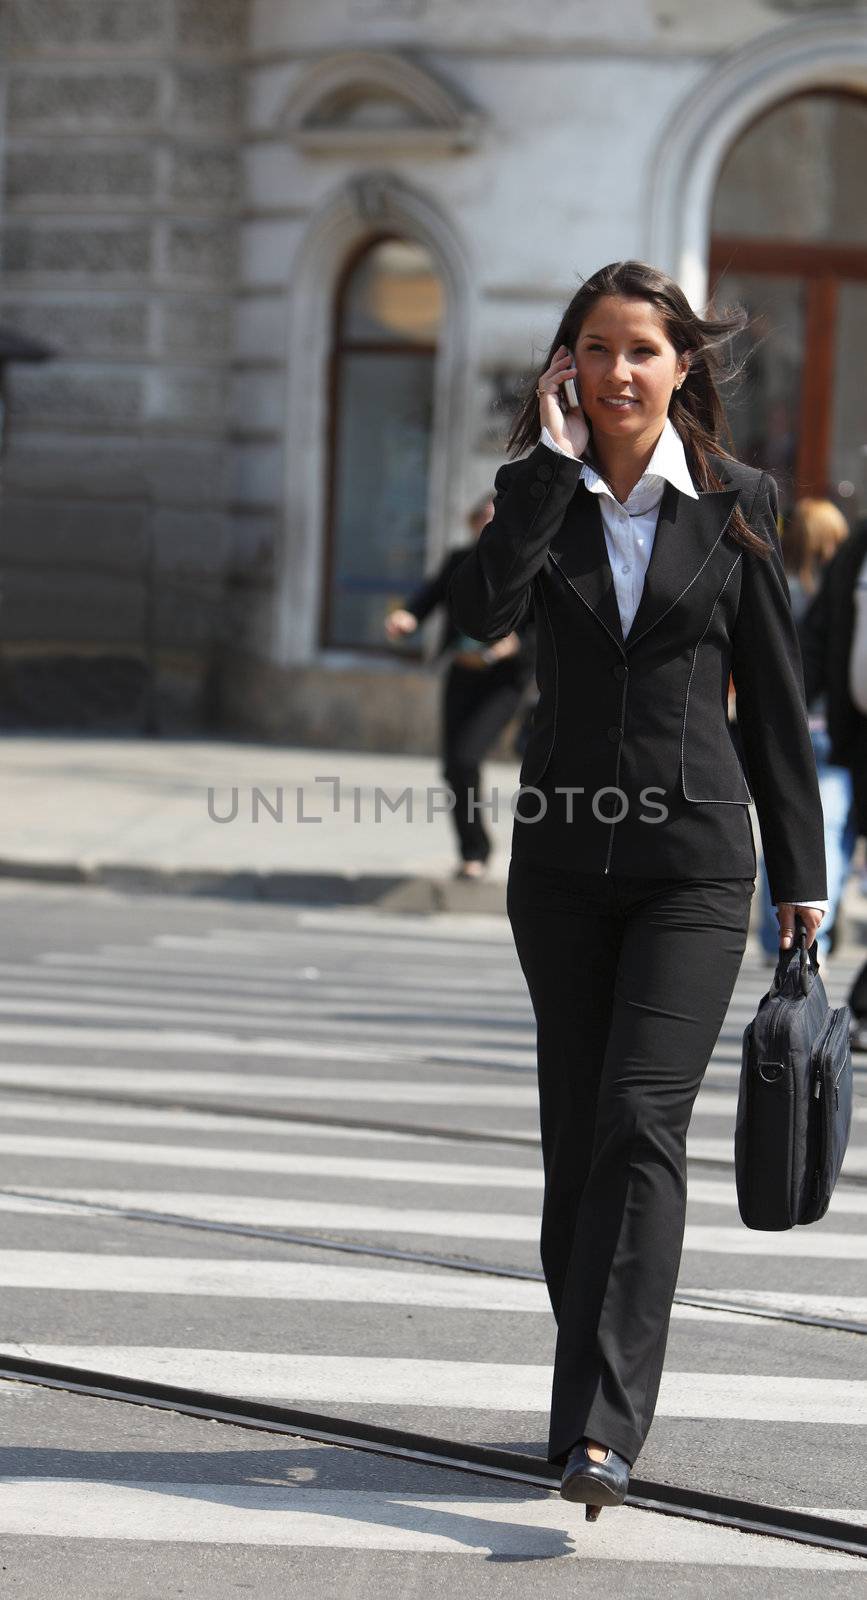 Young businesswoman on the phone crossing the street in a city.